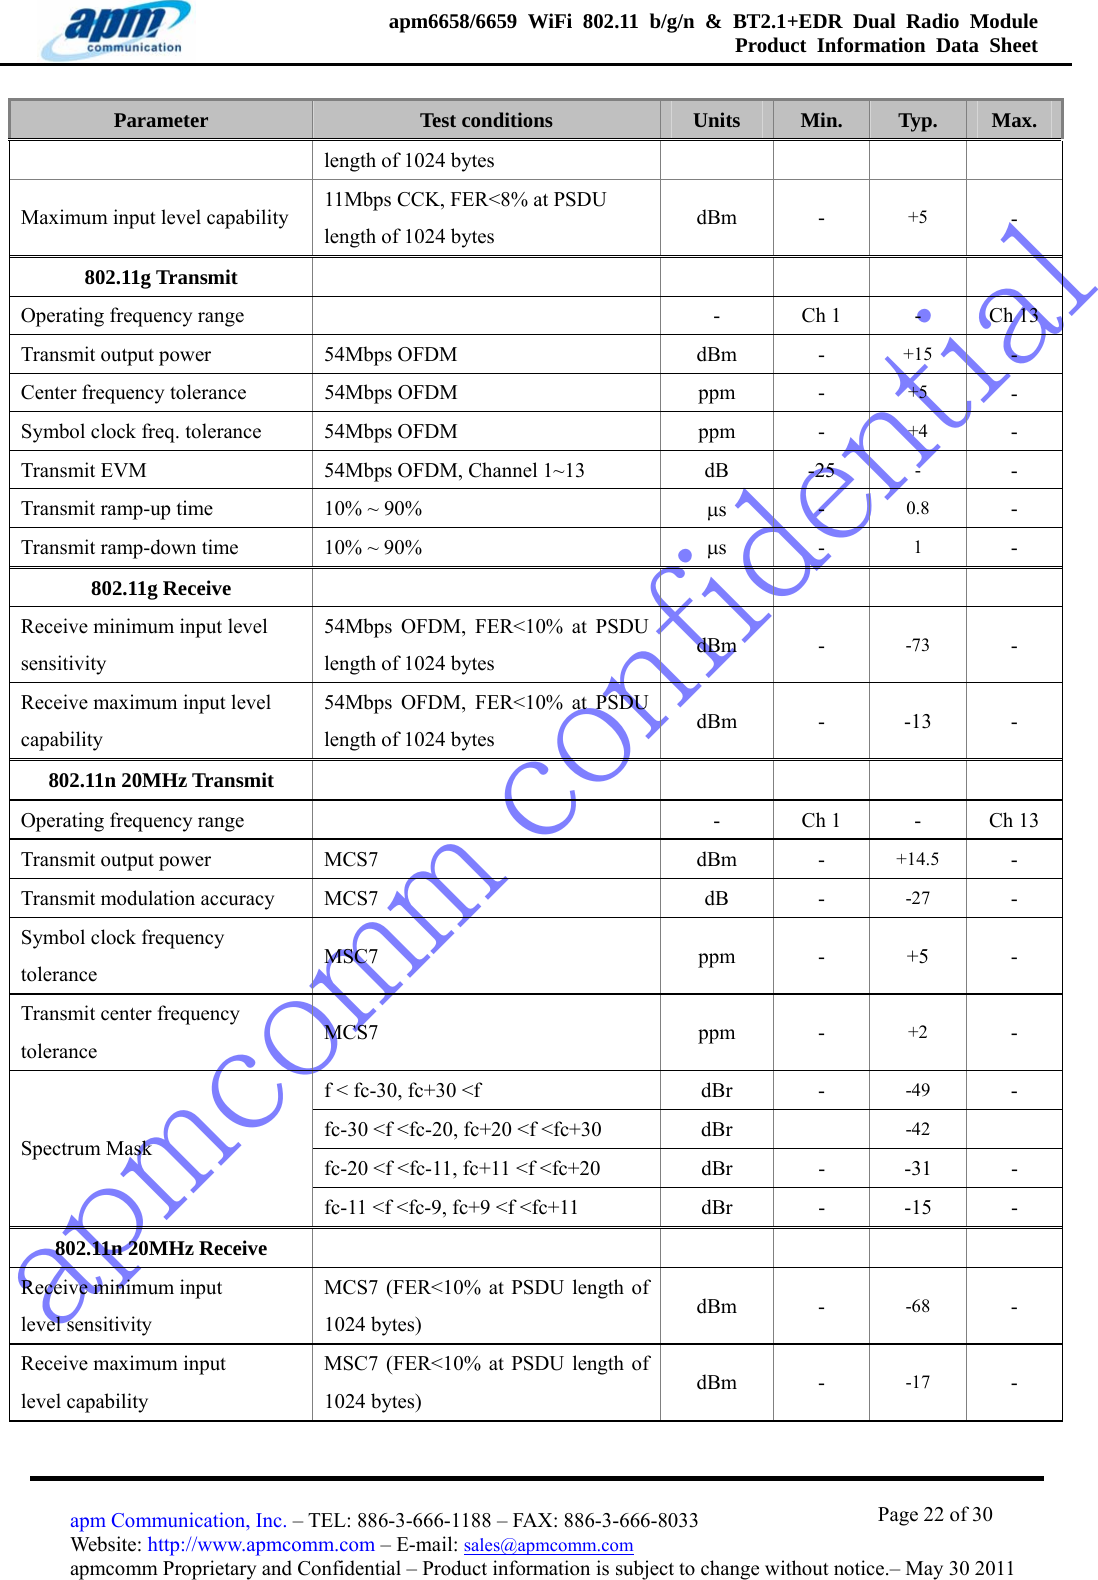 apmcomm confidentialapm6658/6659 WiFi 802.11 b/g/n &amp; BT2.1+EDR Dual Radio Module  Product Information Data Sheet                                       Page 22 of 30 apm Communication, Inc. – TEL: 886-3-666-1188 – FAX: 886-3-666-8033 Website: http://www.apmcomm.com – E-mail: sales@apmcomm.com  apmcomm Proprietary and Confidential – Product information is subject to change without notice.– May 30 2011 Parameter  Test conditions  Units  Min.  Typ.  Max. length of 1024 bytes Maximum input level capability  11Mbps CCK, FER&lt;8% at PSDU length of 1024 bytes  dBm - +5 - 802.11g Transmit        Operating frequency range    -  Ch 1  -  Ch 13 Transmit output power    54Mbps OFDM  dBm  -  +15 - Center frequency tolerance  54Mbps OFDM  ppm  -  +5 - Symbol clock freq. tolerance  54Mbps OFDM  ppm  -  +4 - Transmit EVM  54Mbps OFDM, Channel 1~13  dB  -25  - - Transmit ramp-up time  10% ~ 90%  μs  -  0.8 - Transmit ramp-down time  10% ~ 90%  μs  -  1 - 802.11g Receive        Receive minimum input level sensitivity 54Mbps OFDM, FER&lt;10% at PSDU length of 1024 bytes  dBm - -73 - Receive maximum input level capability  54Mbps OFDM, FER&lt;10% at PSDU length of 1024 bytes  dBm - -13 - 802.11n 20MHz Transmit         Operating frequency range   -  Ch 1  -  Ch 13 Transmit output power  MCS7  dBm  -  +14.5 - Transmit modulation accuracy    MCS7  dB  -  -27 - Symbol clock frequency tolerance  MSC7  ppm - +5 - Transmit center frequency tolerance  MCS7 ppm - +2 - f &lt; fc-30, fc+30 &lt;f  dBr  -  -49 - fc-30 &lt;f &lt;fc-20, fc+20 &lt;f &lt;fc+30  dBr    -42   fc-20 &lt;f &lt;fc-11, fc+11 &lt;f &lt;fc+20  dBr  -  -31  - Spectrum Mask fc-11 &lt;f &lt;fc-9, fc+9 &lt;f &lt;fc+11  dBr  -  -15  - 802.11n 20MHz Receive         Receive minimum input   level sensitivity MCS7 (FER&lt;10% at PSDU length of 1024 bytes)  dBm - -68 - Receive maximum input   level capability MSC7 (FER&lt;10% at PSDU length of 1024 bytes)  dBm - -17 - 